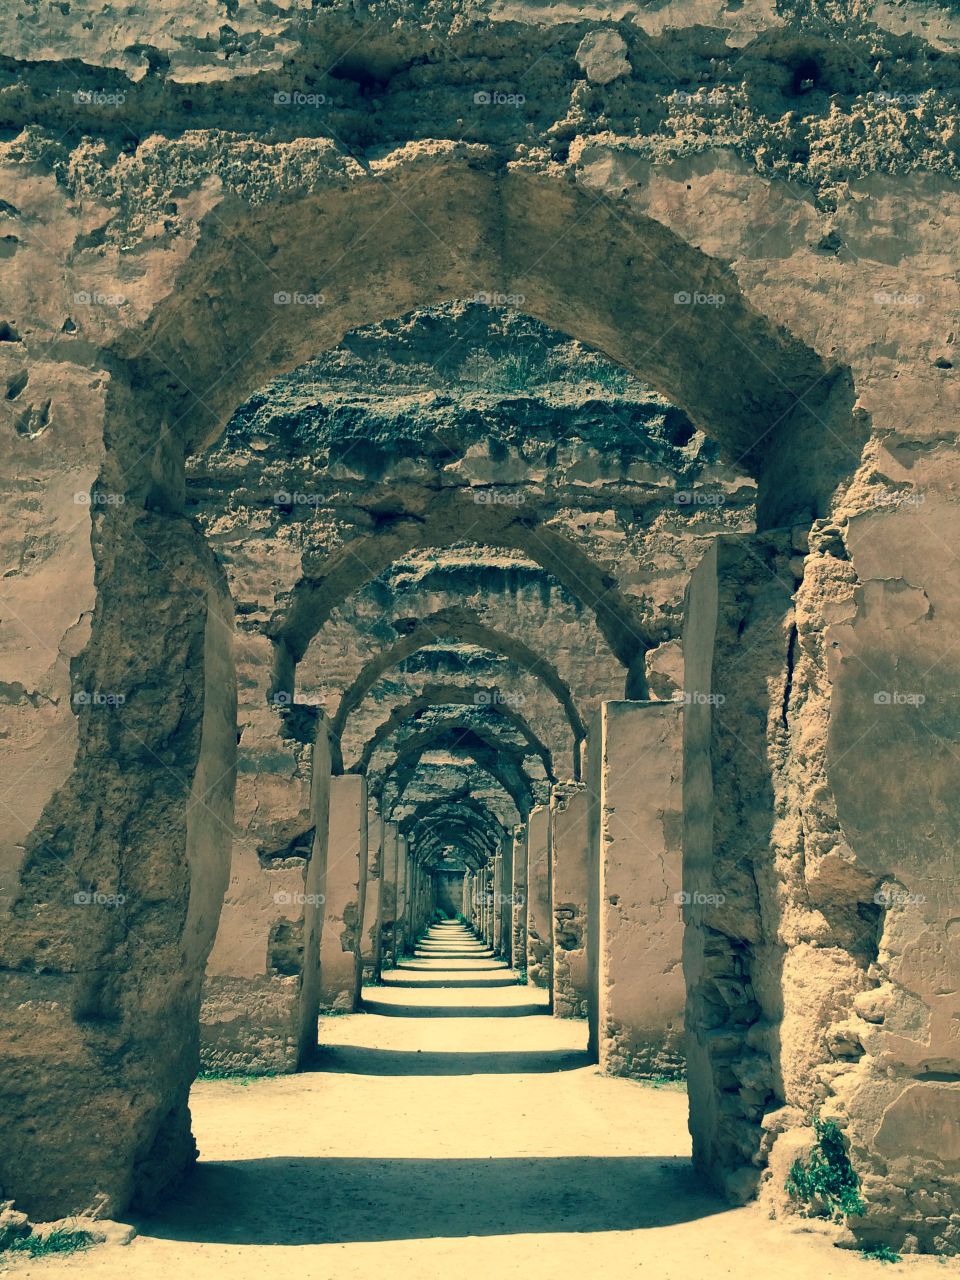 Royal Stables - Arches Perspective View in Meknes, Morocco